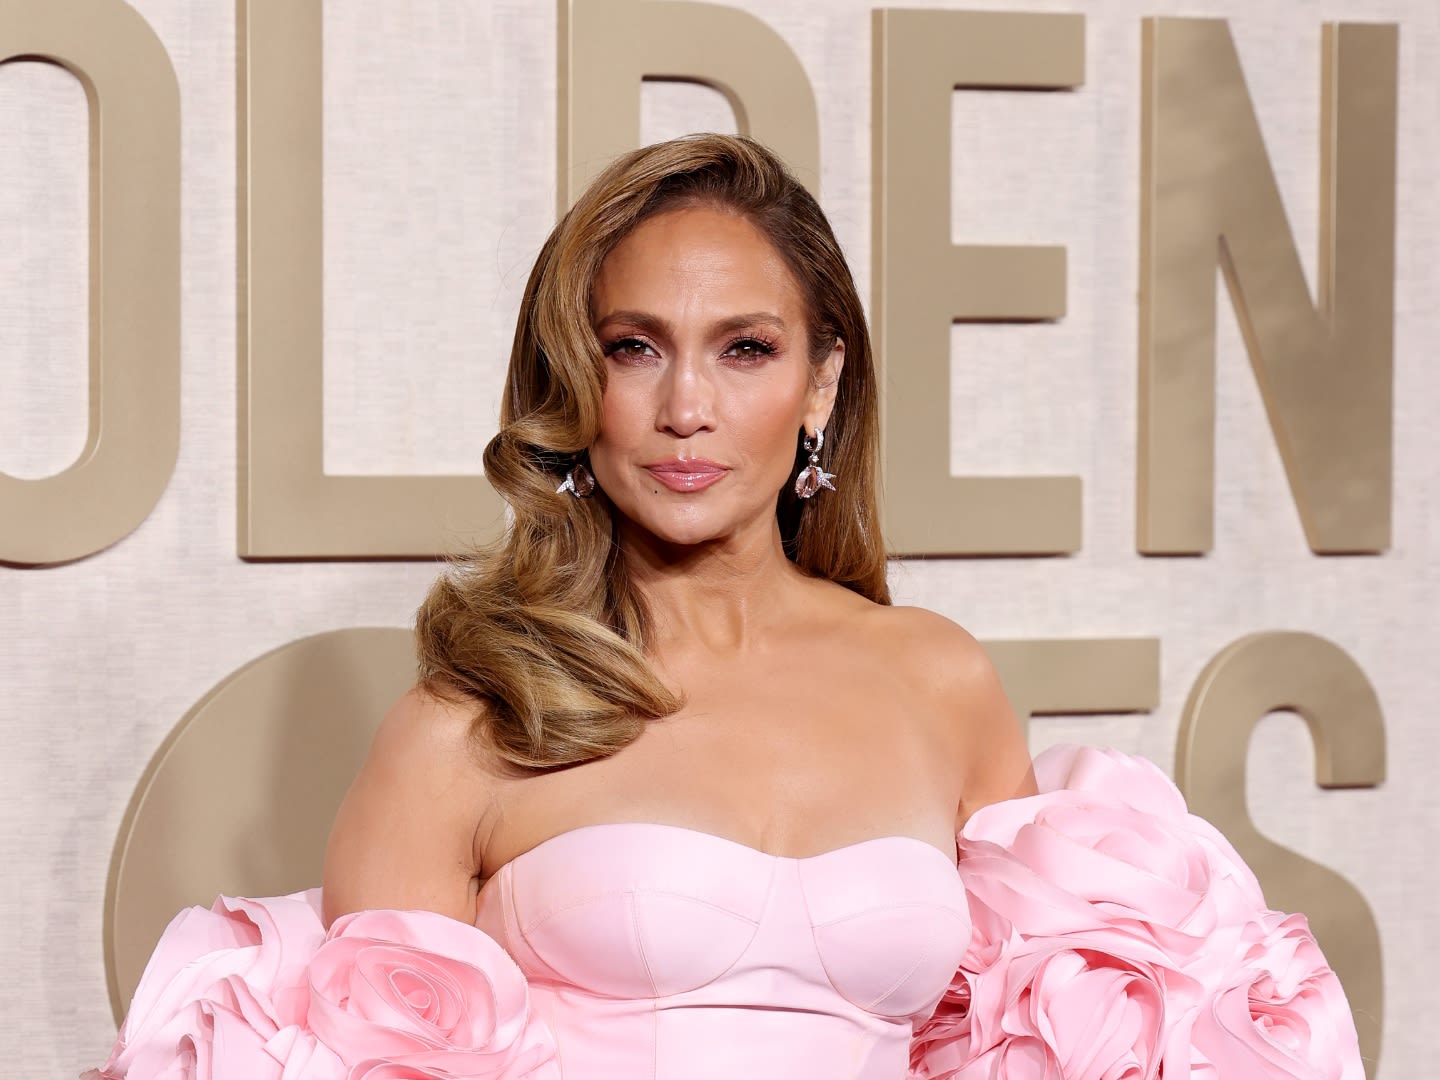 Insiders Claim Jennifer Lopez May Already Be Looking to Reconnect With This Ex Amid Ben Affleck Drama